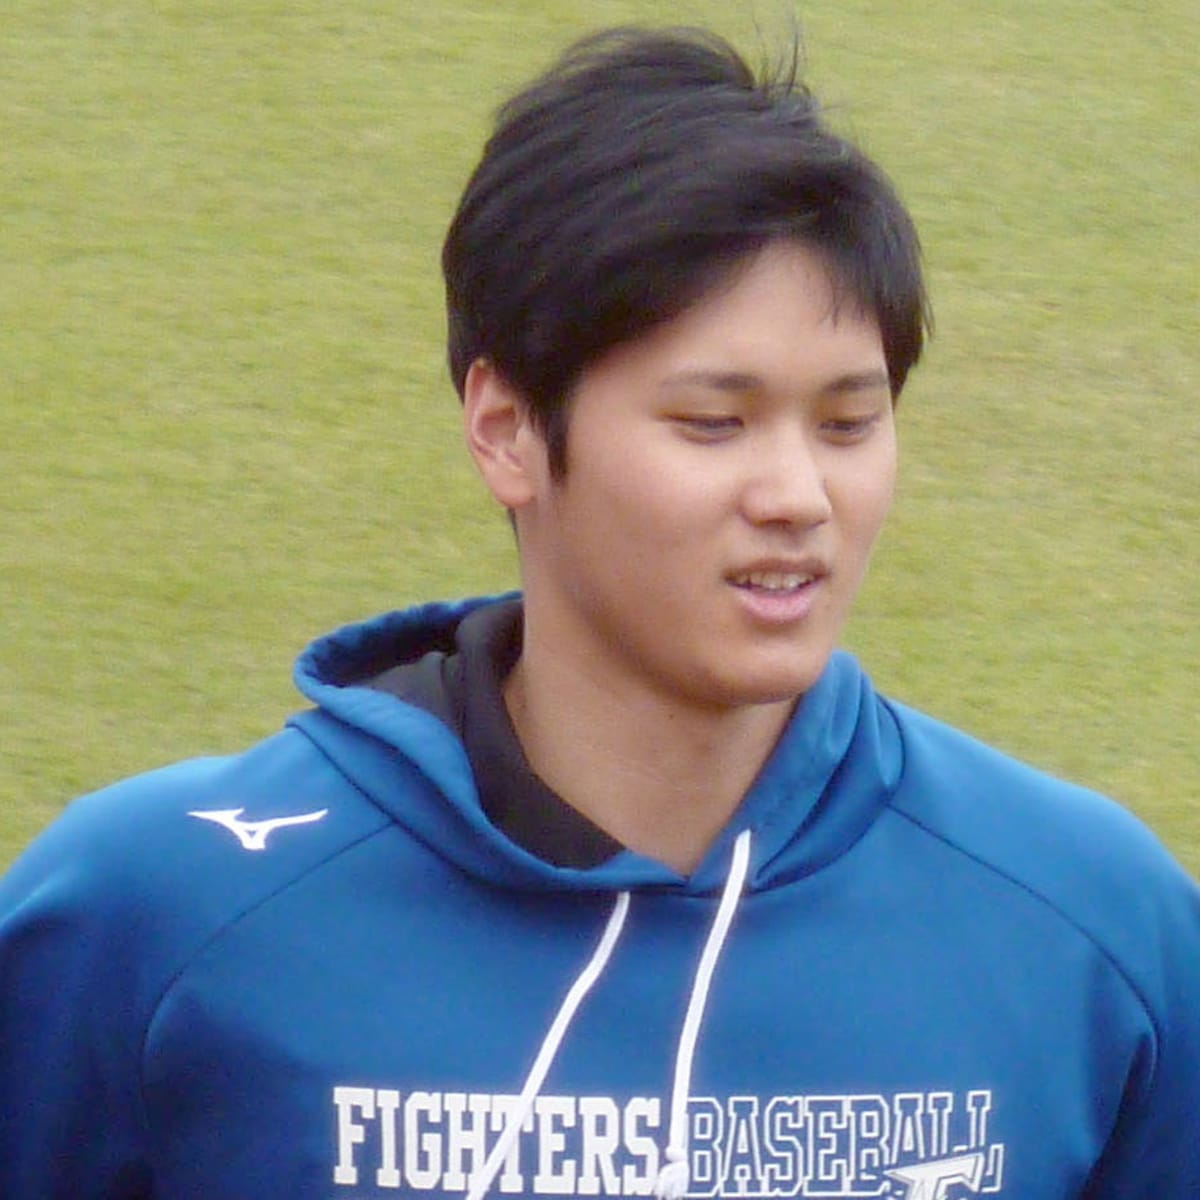 Searching for Ohtani' examines Japan's affinity for Shohei Ohtani